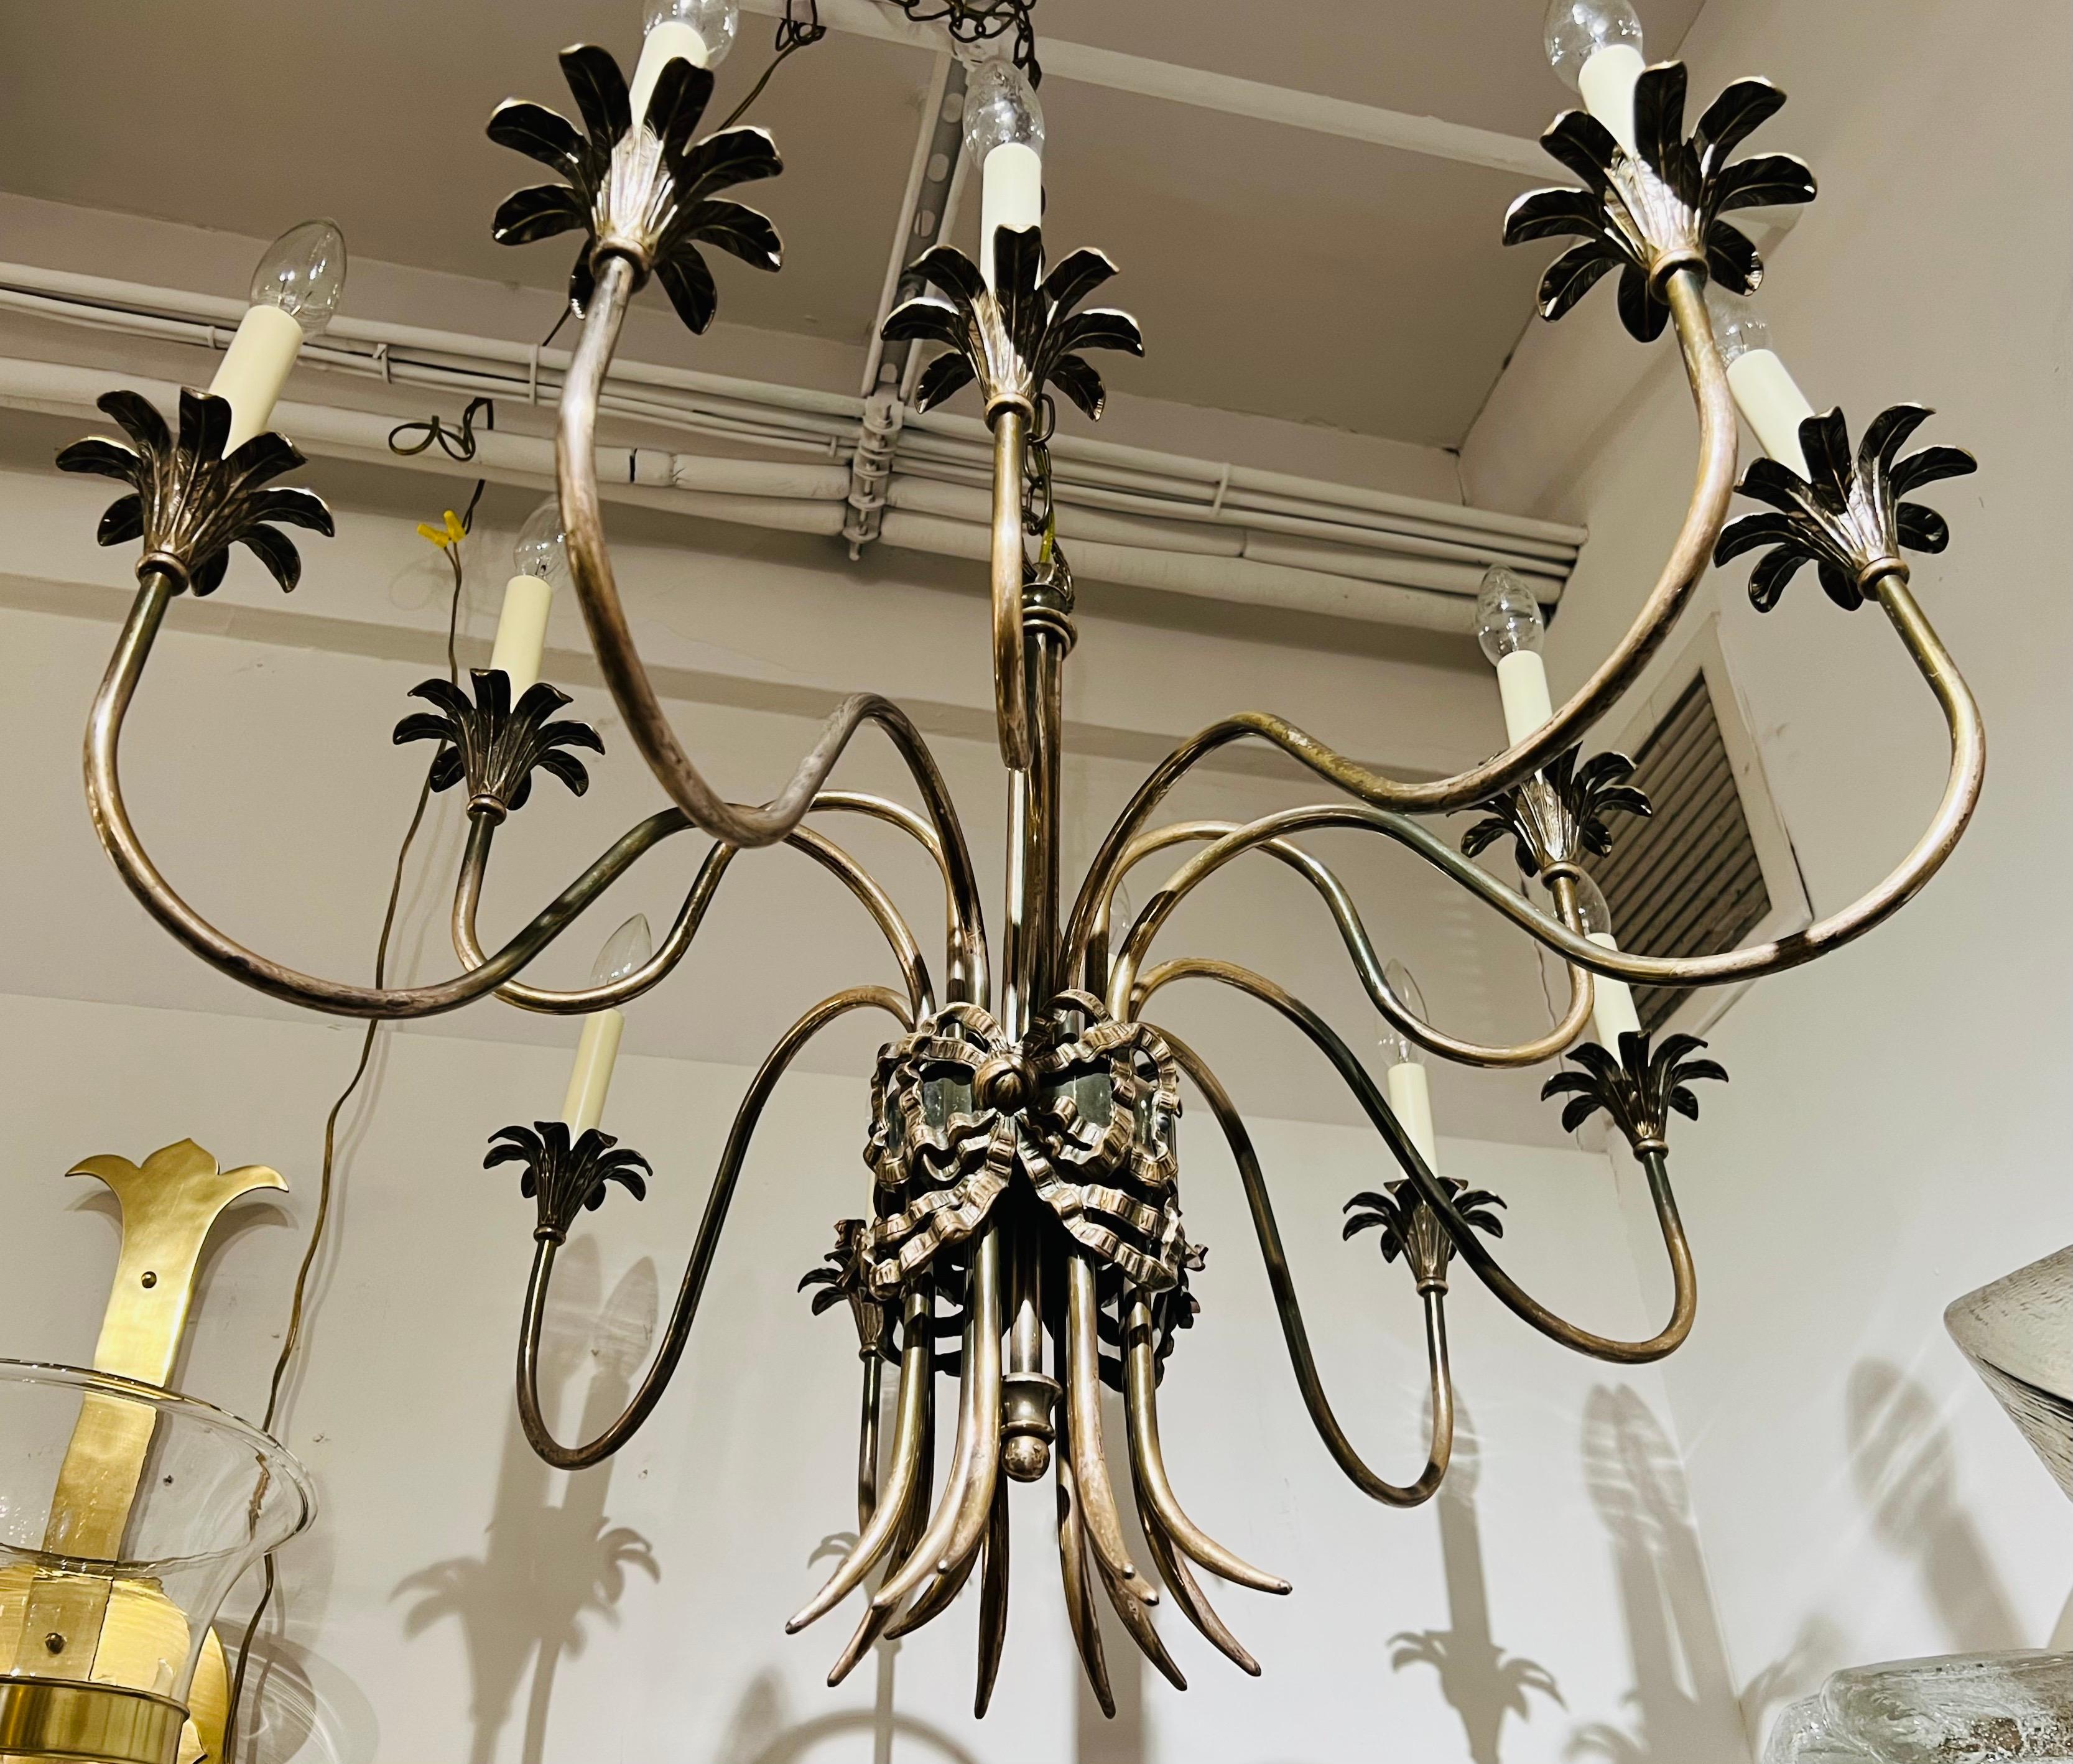 A wonderful Empire style Italian chandelier in the style of Buccellati. Rewired. 12 Light sources. Candelabra sockets. Rewired. 23” is the body. The chain can be adjusted to your needs. Great decorative details.